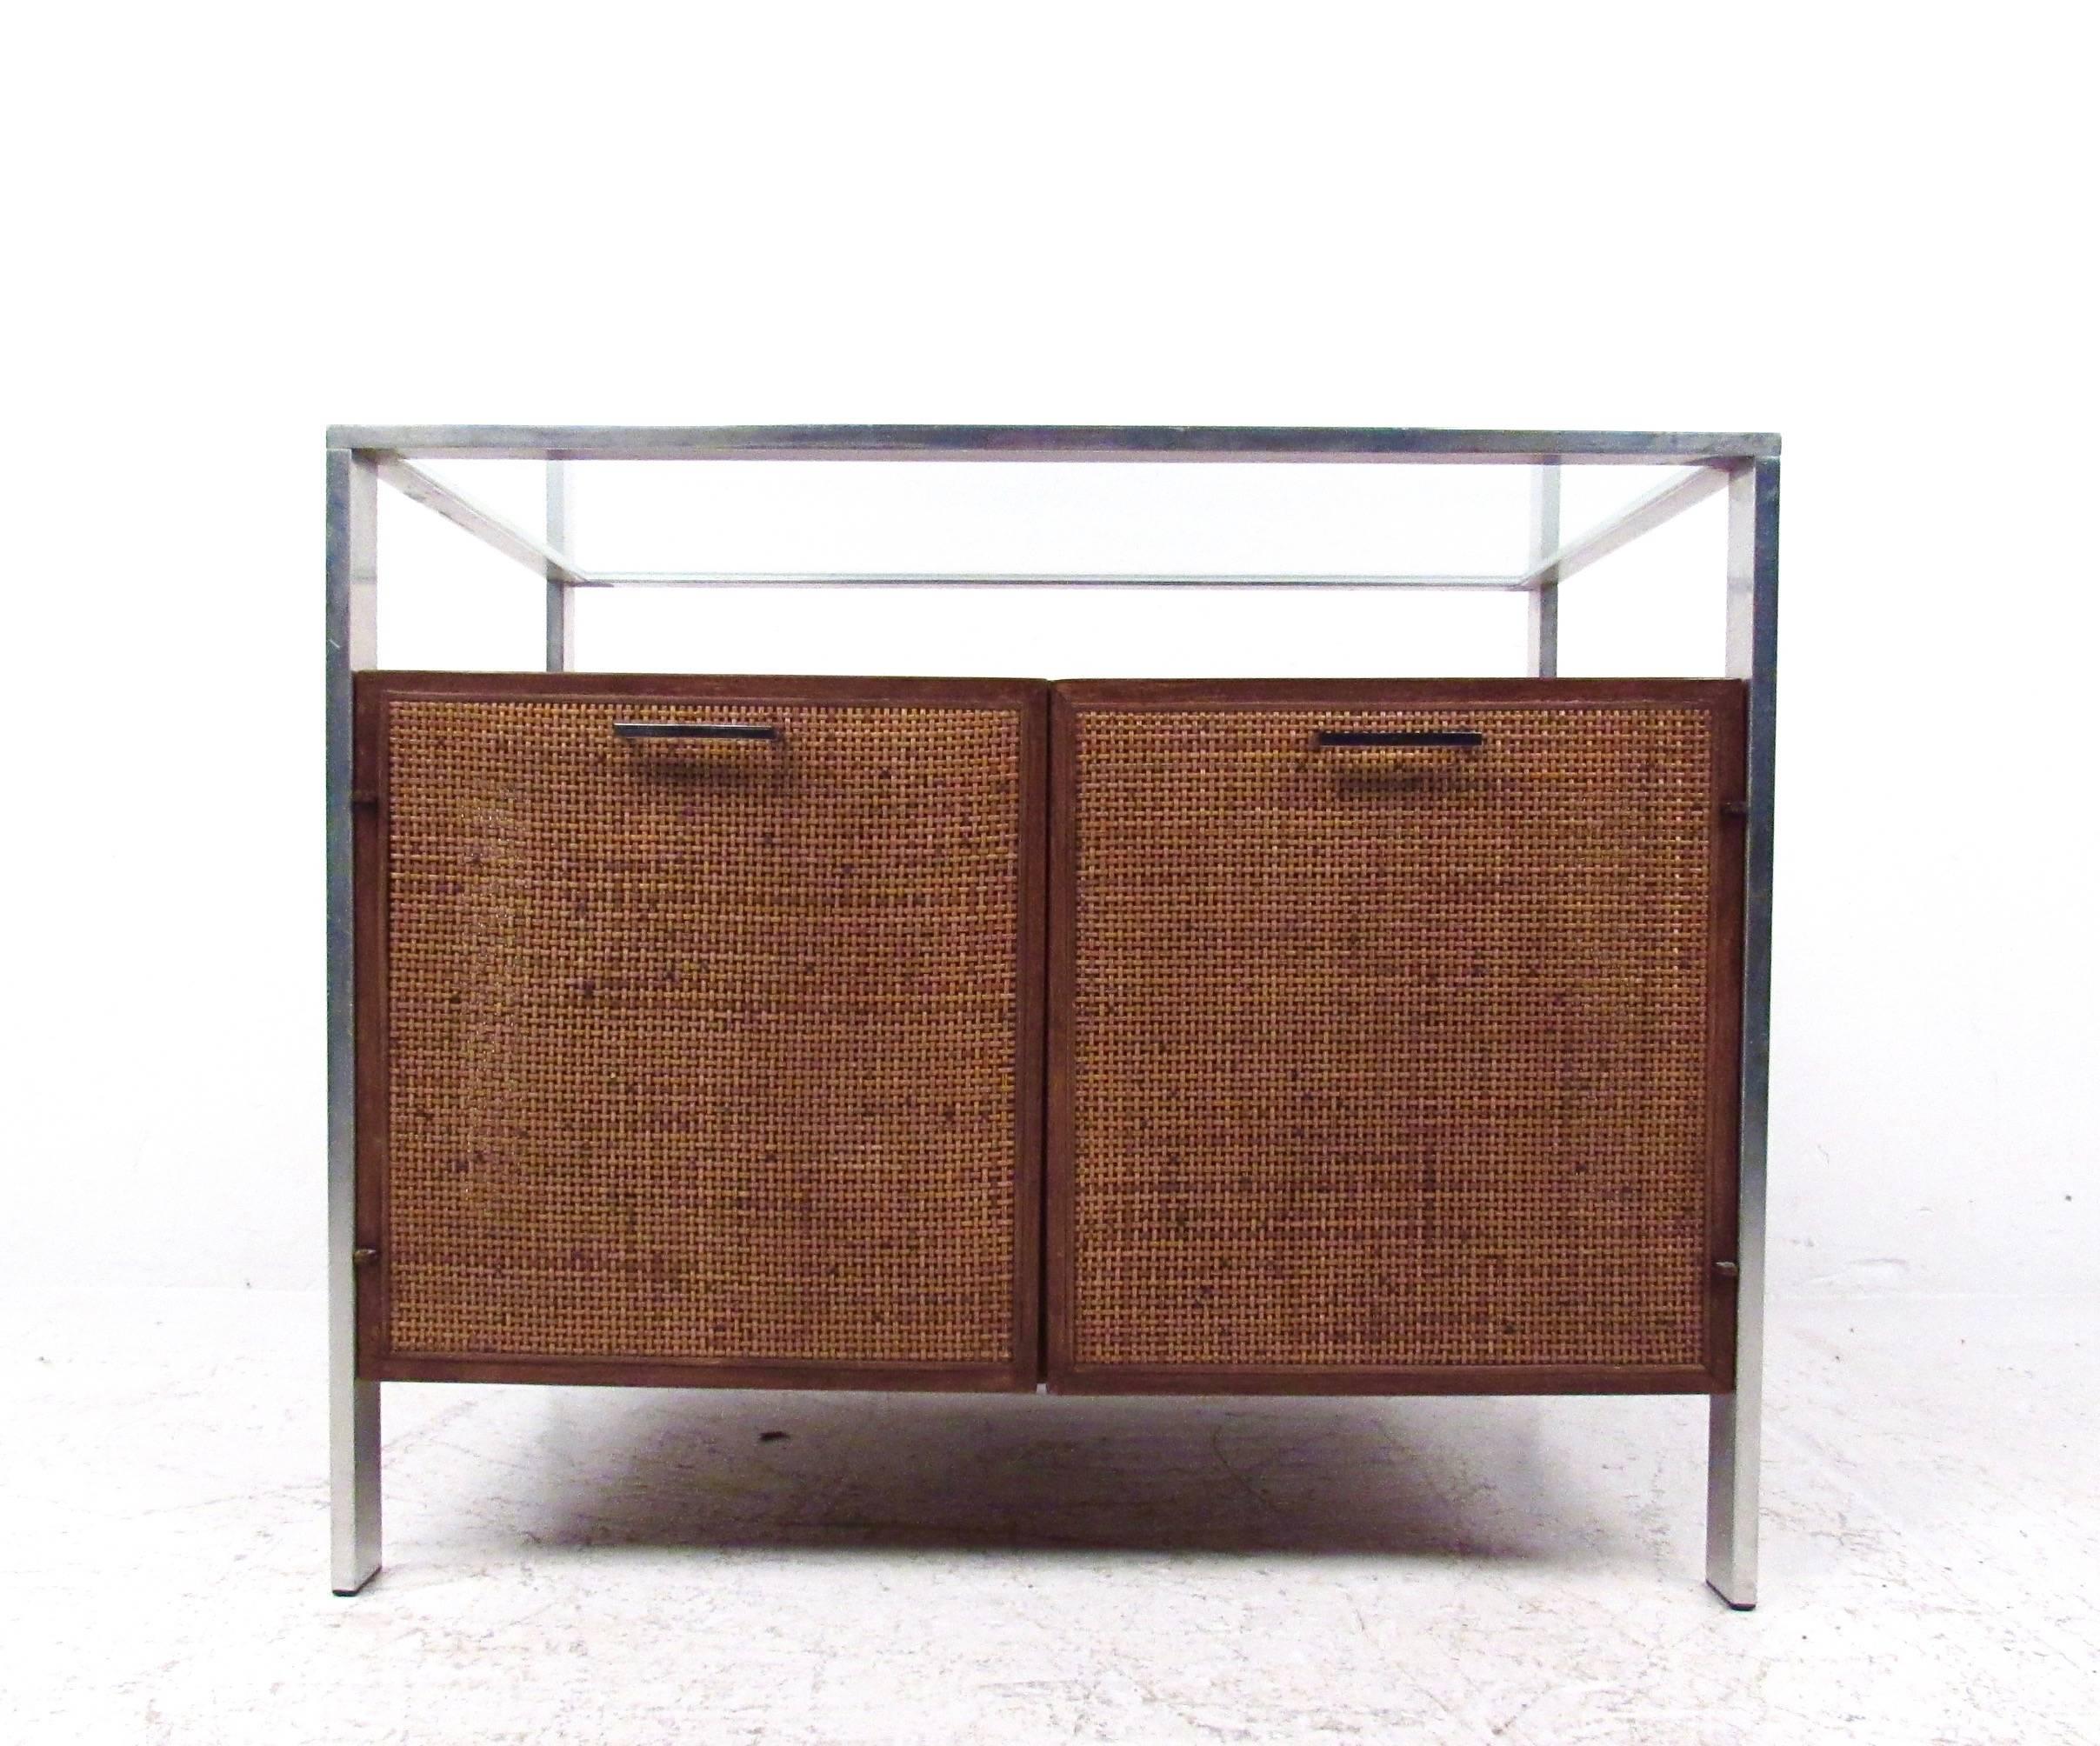 This vintage modern glass top cabinet features woven cane doors and sides with a two-tier top. Chrome finish frame and handles complete the unique Mid-Century Modern appeal of the piece. Perfect option for stylish home or office storage, please